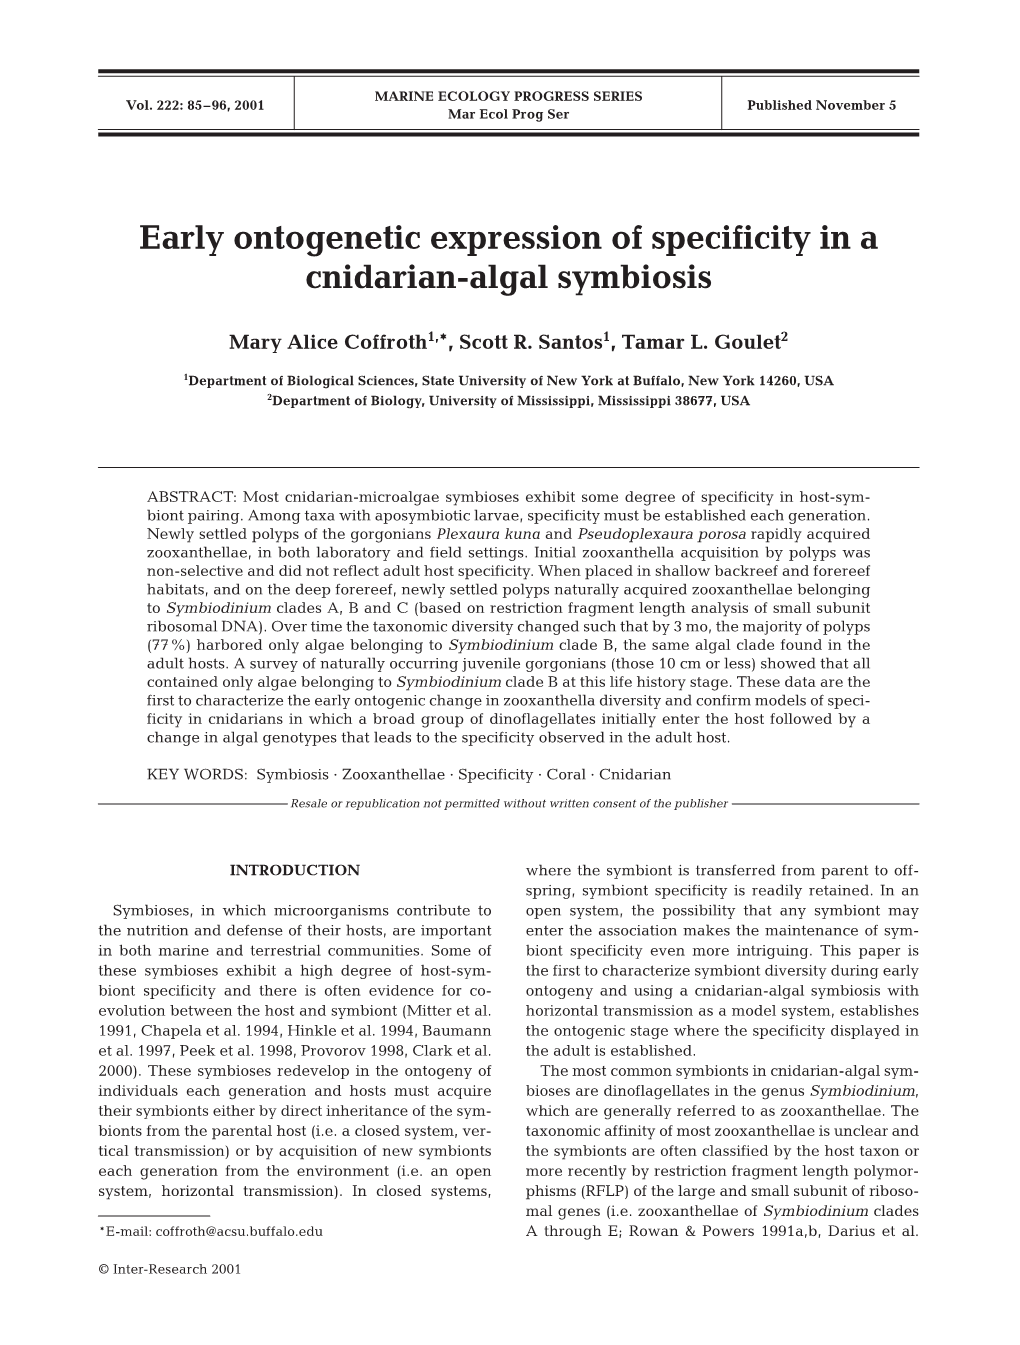 Early Ontogenetic Expression of Specificity in a Cnidarian-Algal Symbiosis